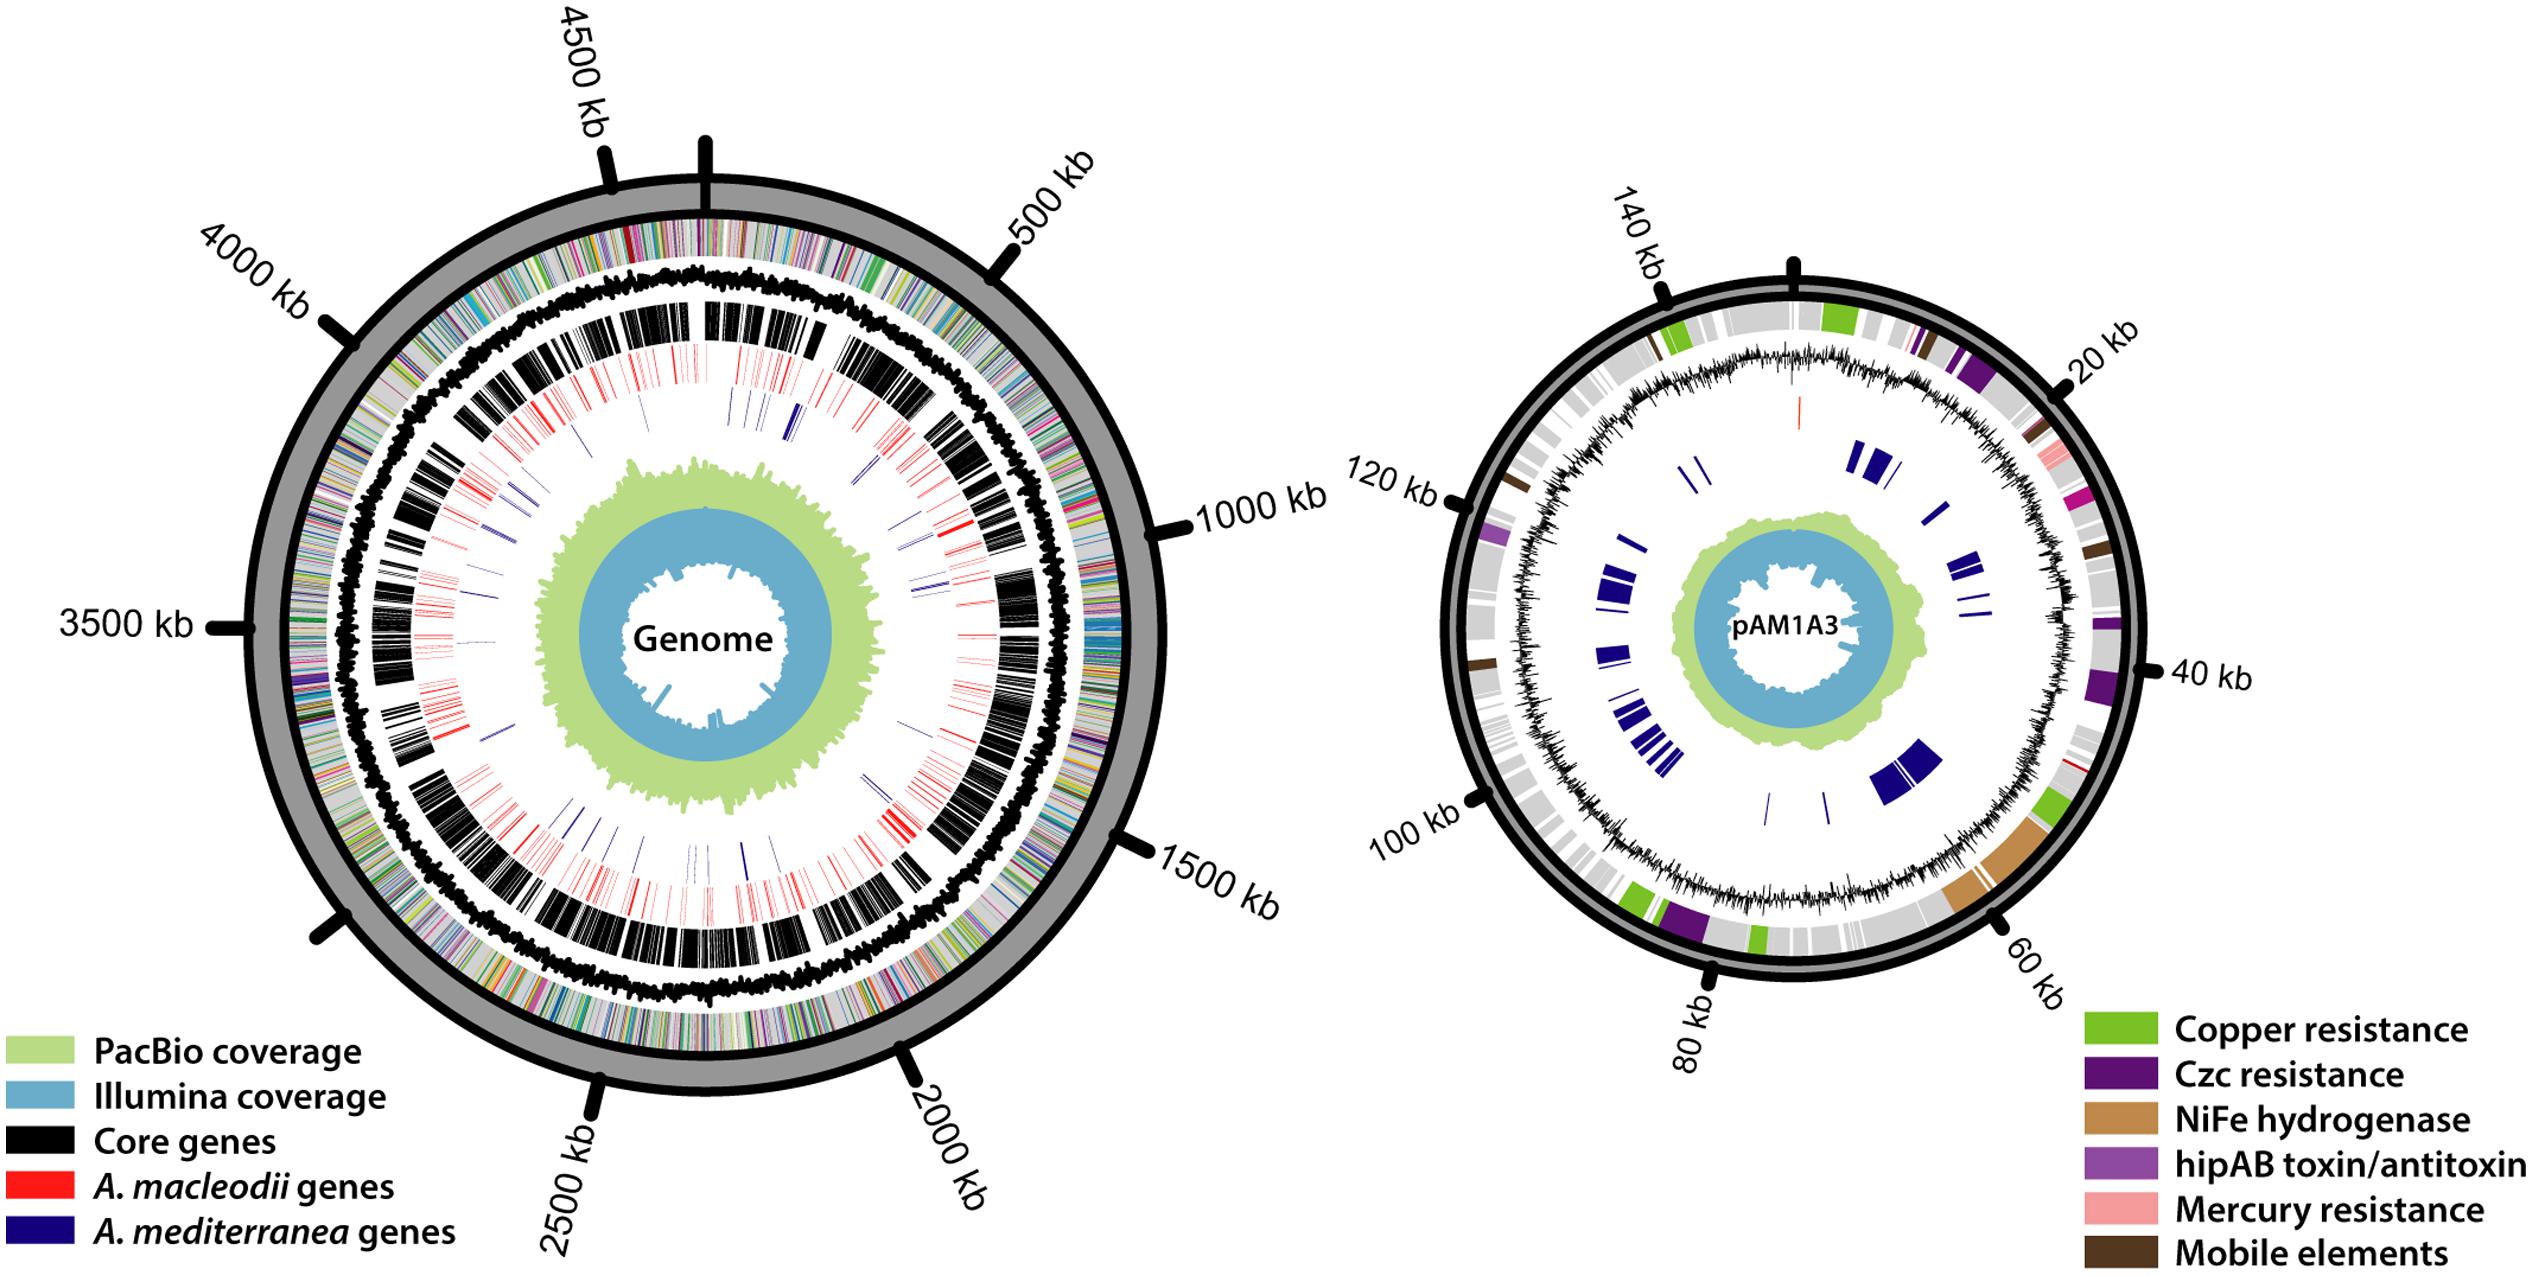 Frontiers | Why Close a Bacterial Genome? The Plasmid of Alteromonas